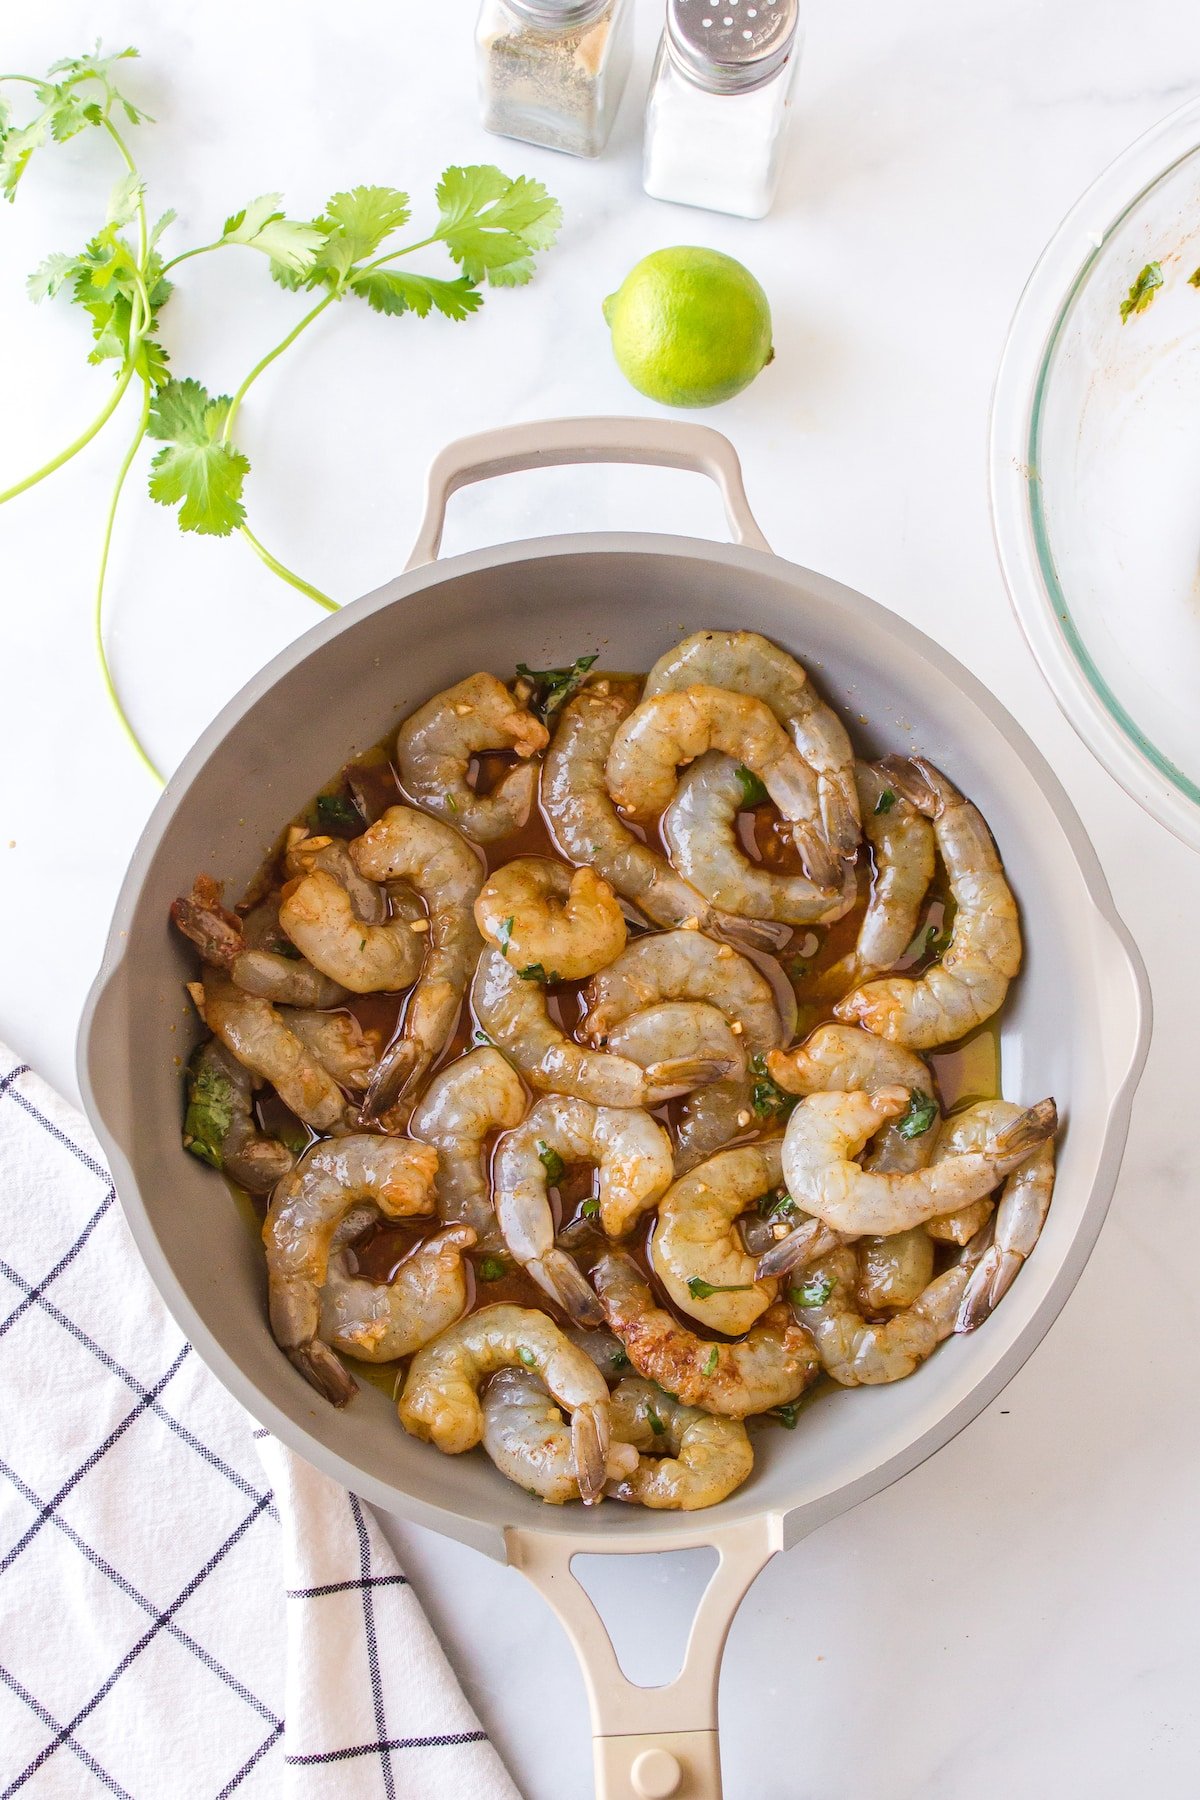 raw, marinated shrimp cooking in a skillet.